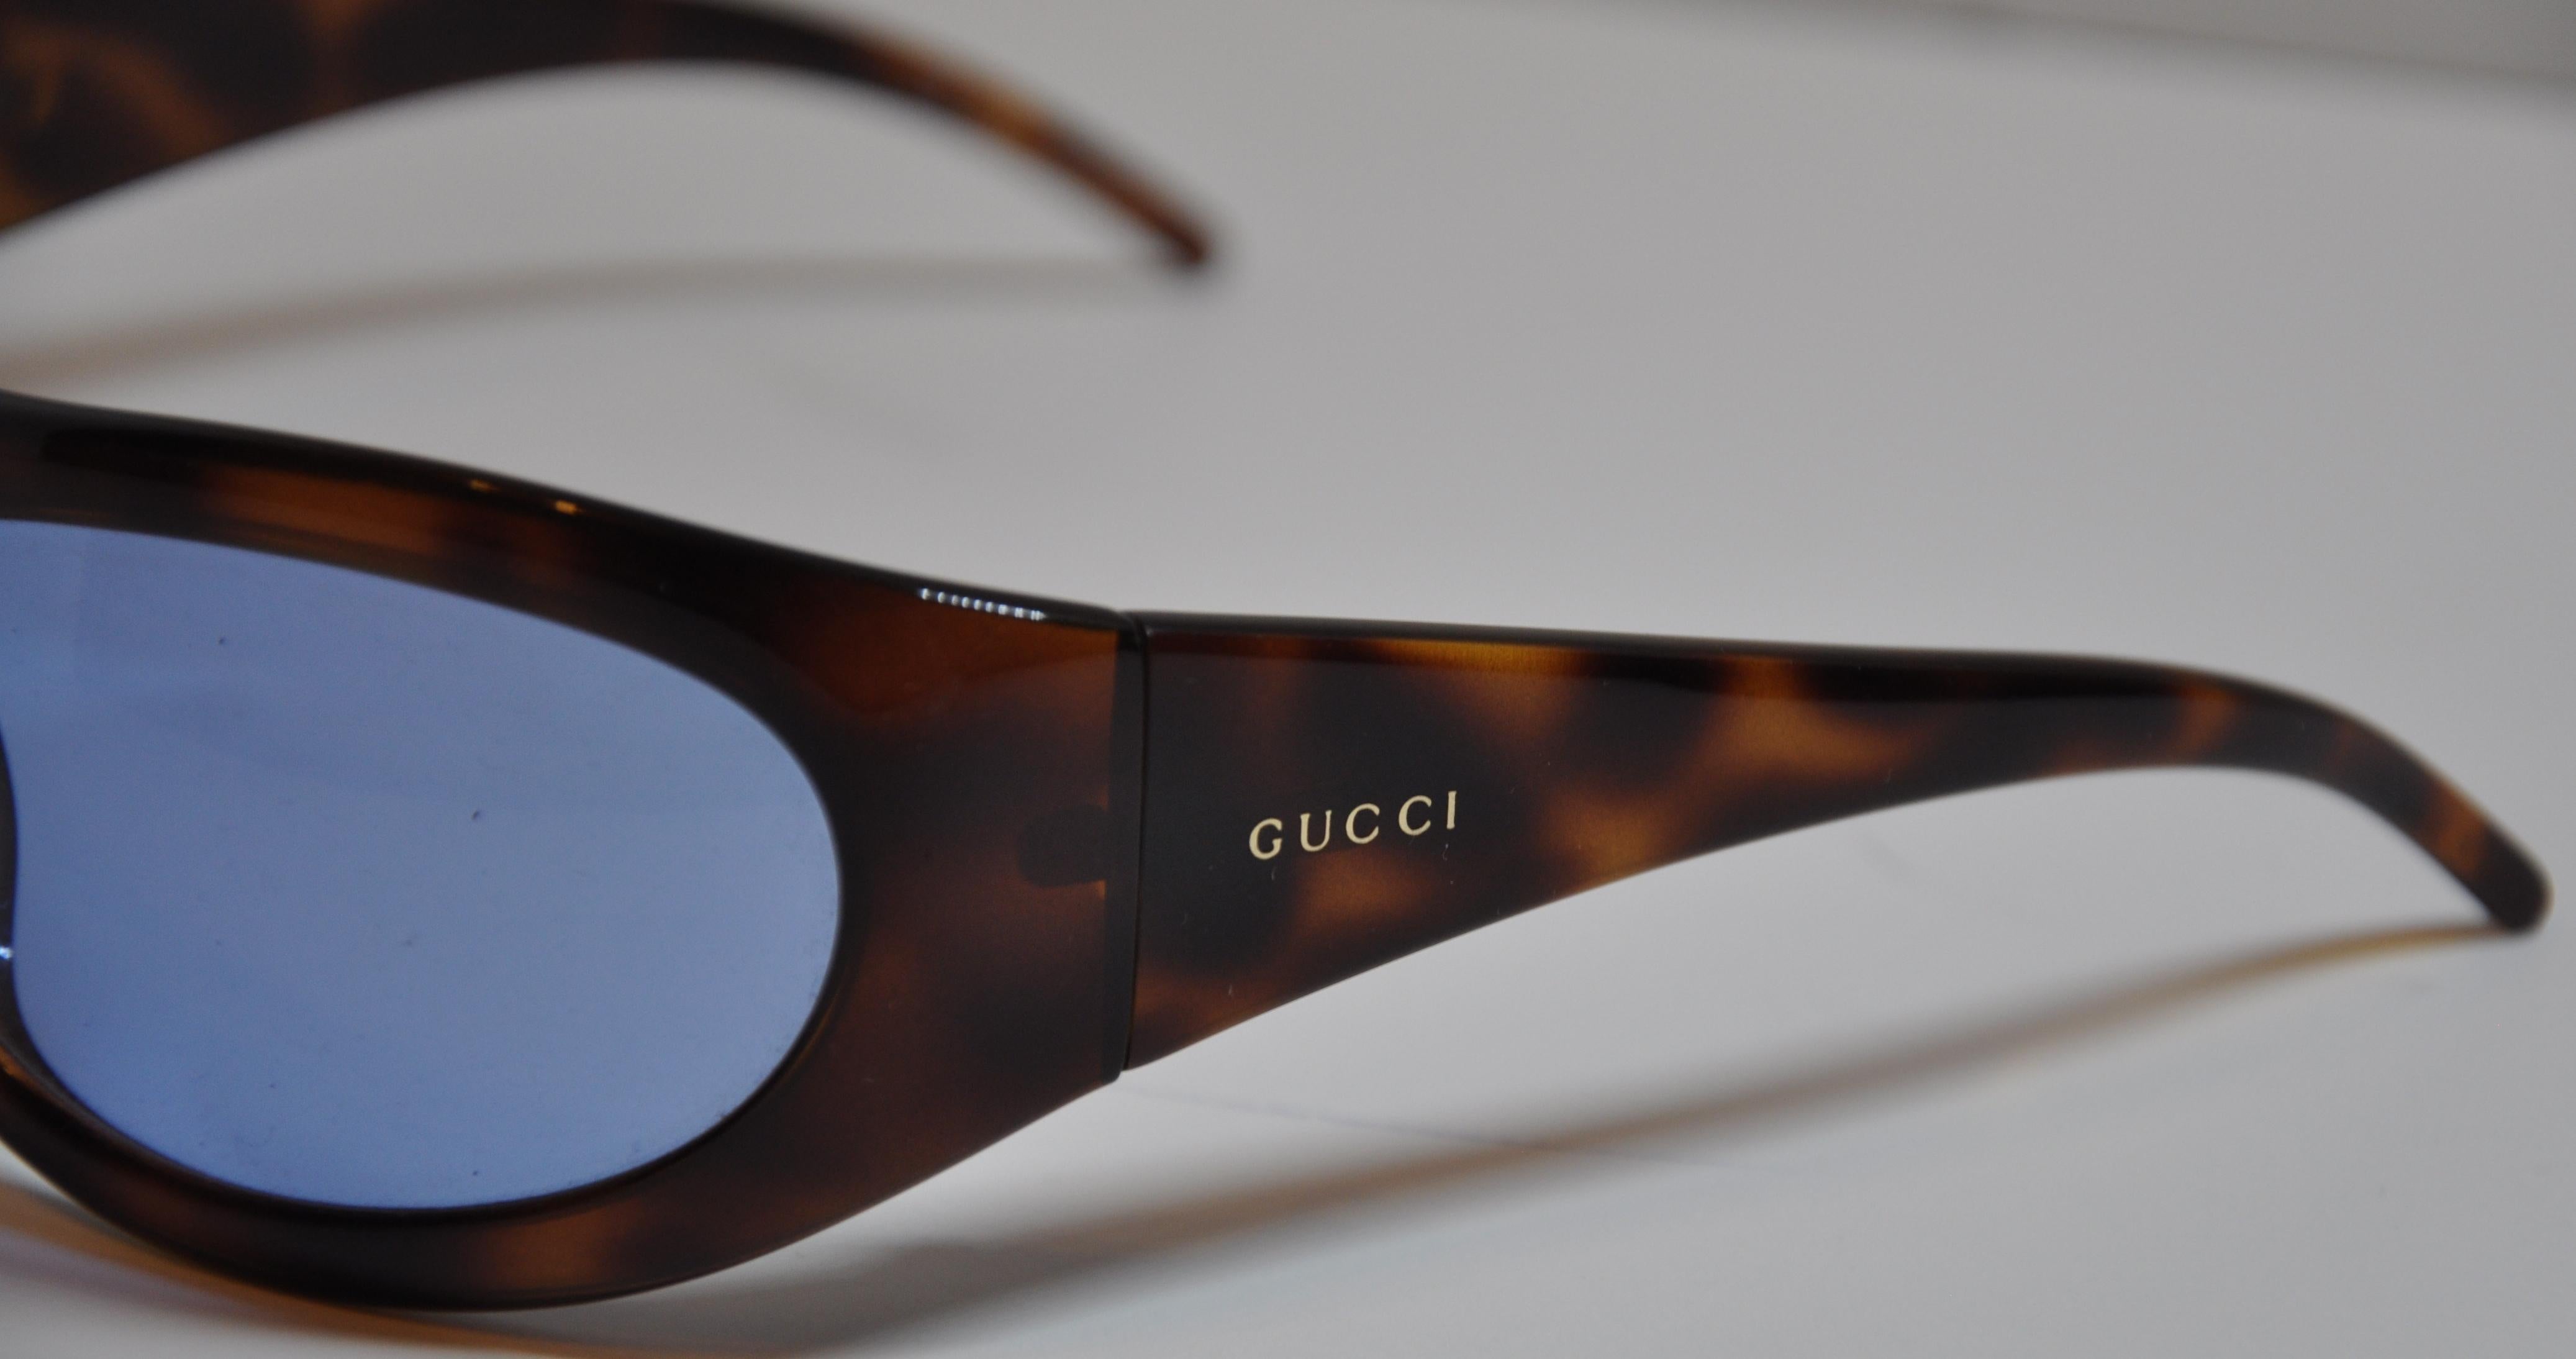        Gucci deep rich and warm tortoise shell sunglasses are accented with a blue-tinted lens. The front measures 5 6/8 inches across, height is 1 7/8 inches, and the arms measures 4 3/4 inches in length. Made in Italy.